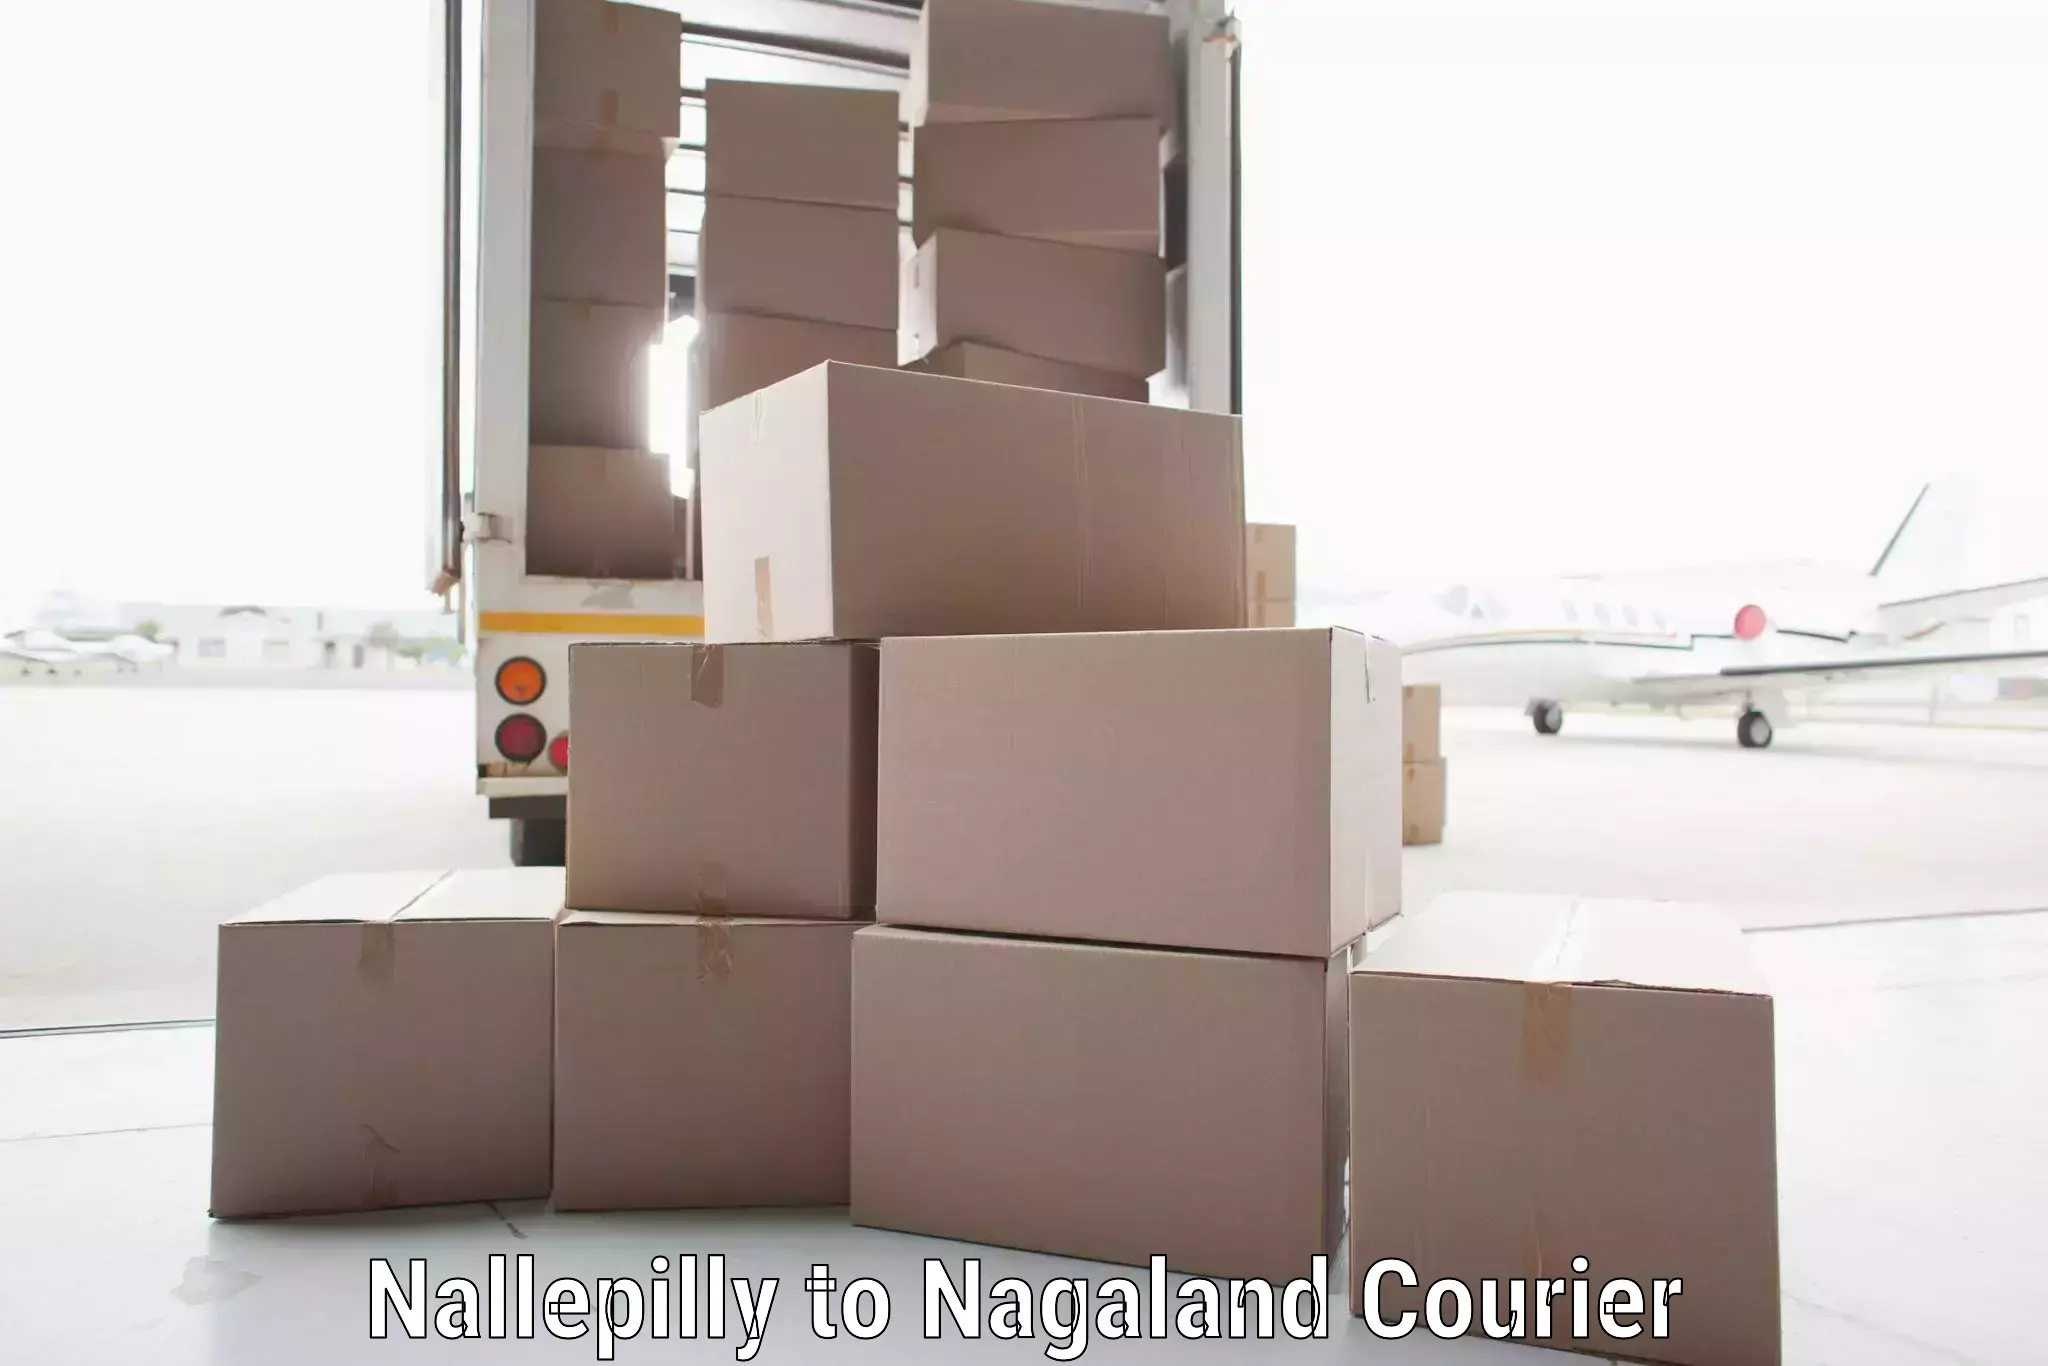 Courier service innovation Nallepilly to Dimapur